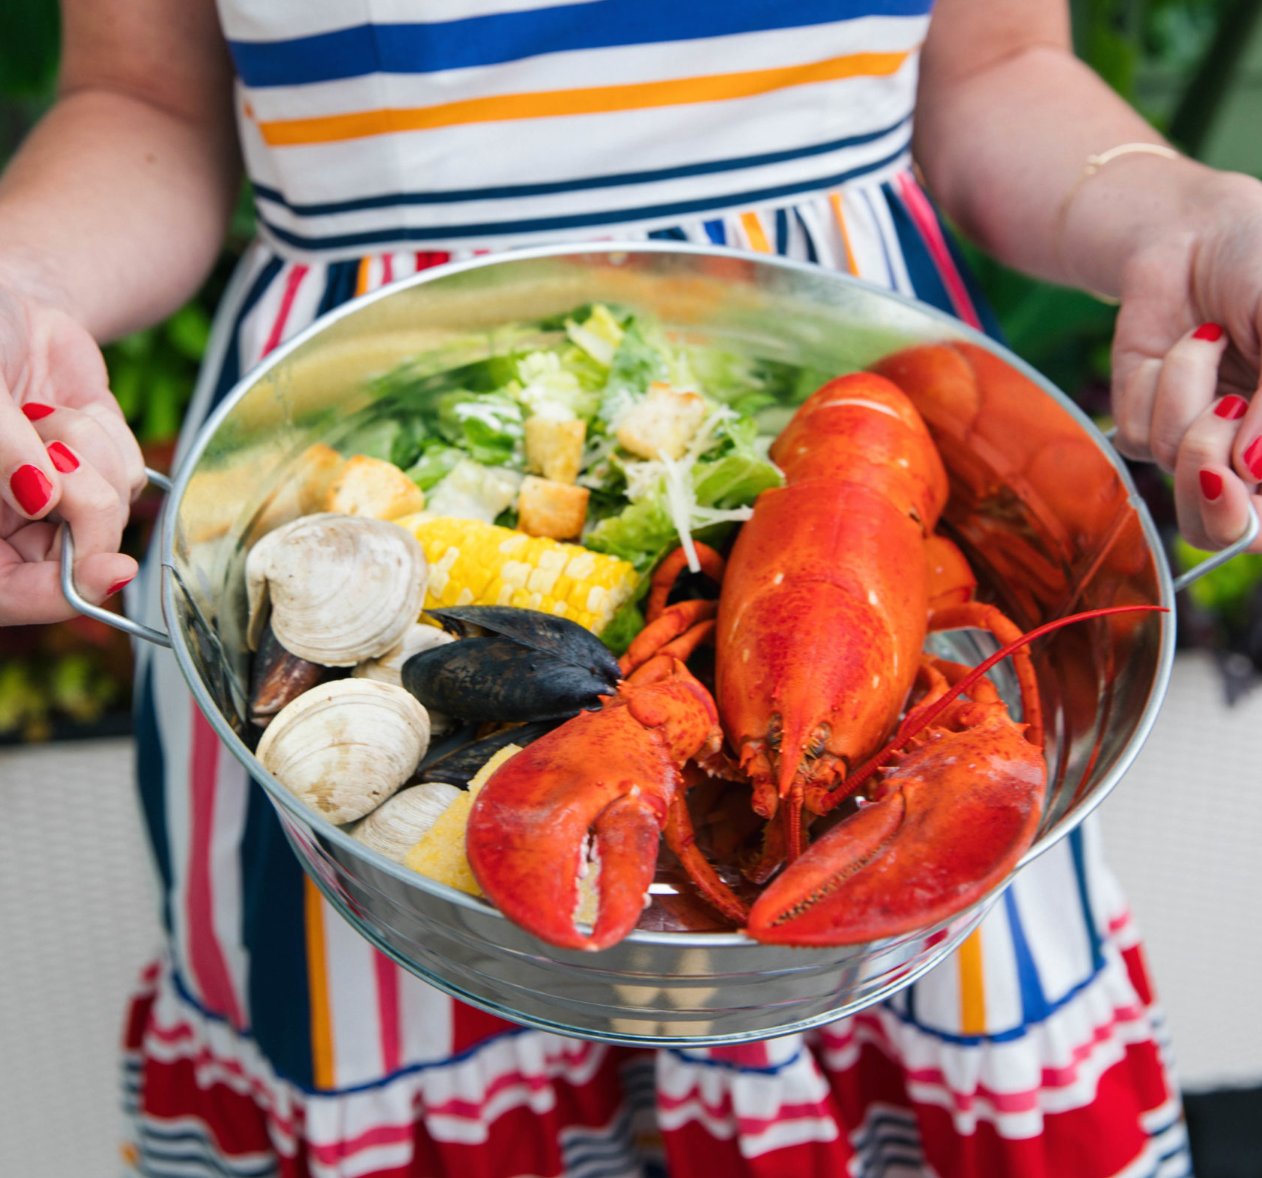 The Breeze clambake is offered Monday nights through the summer.